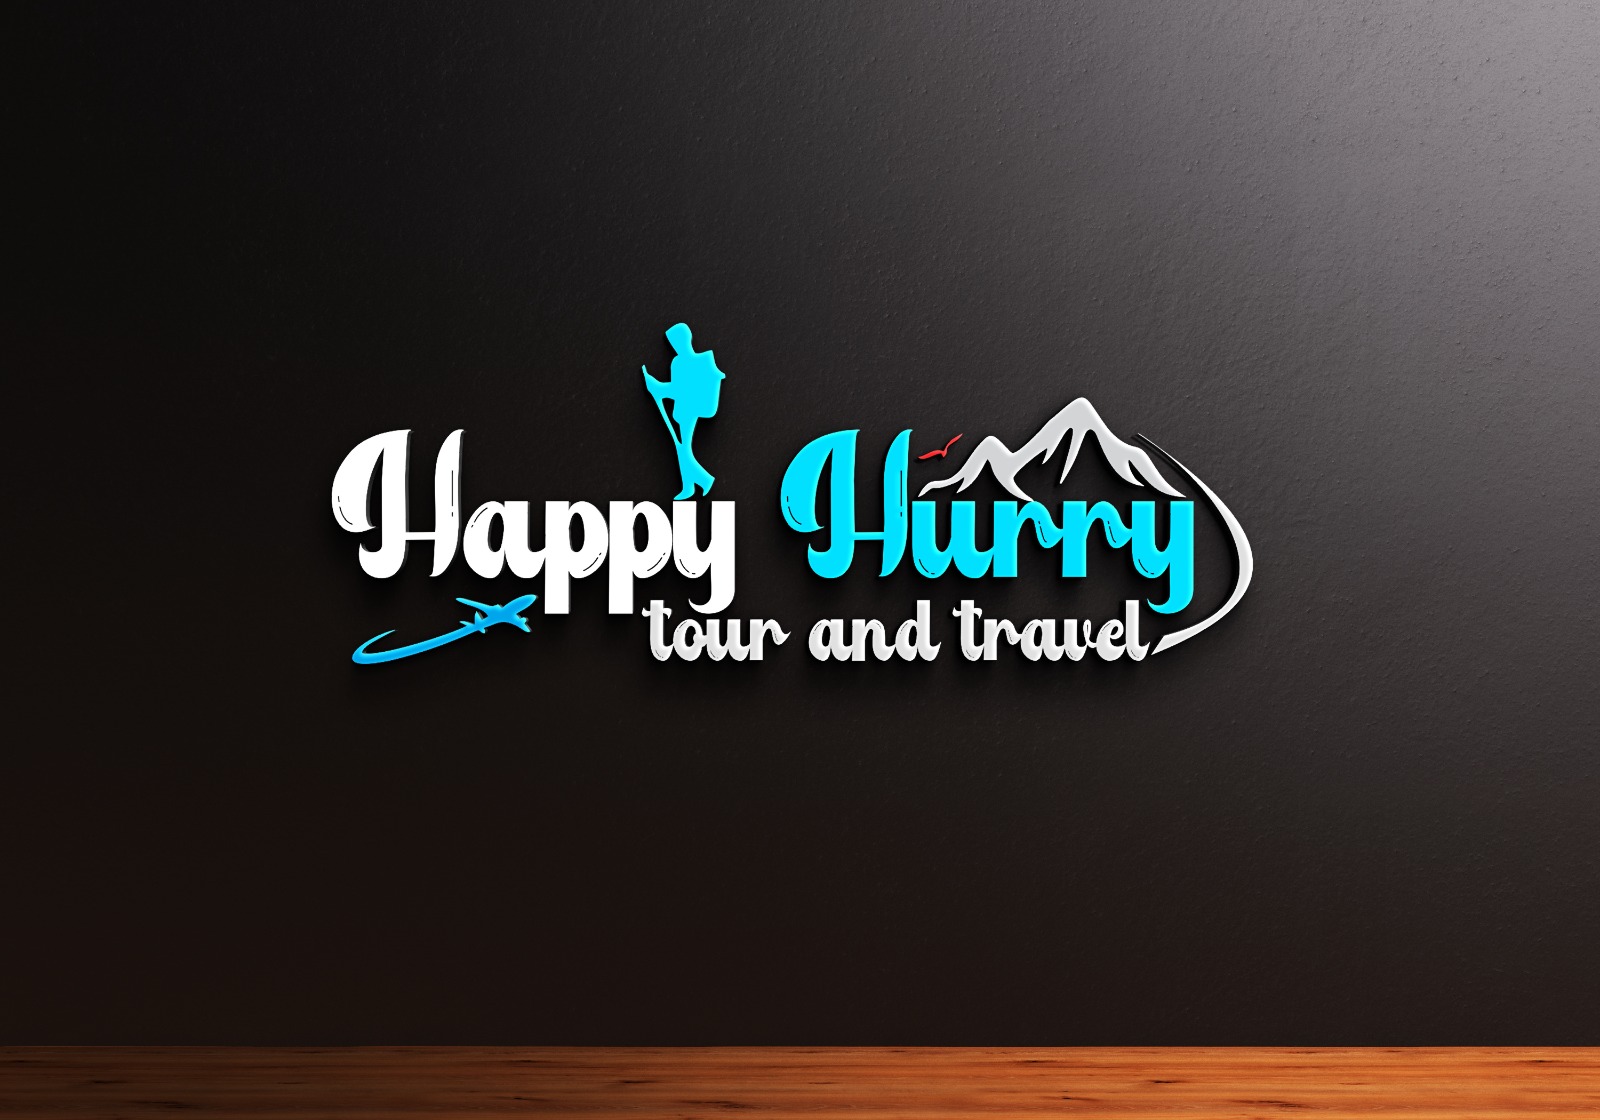 Happy Hurry Tour Travels